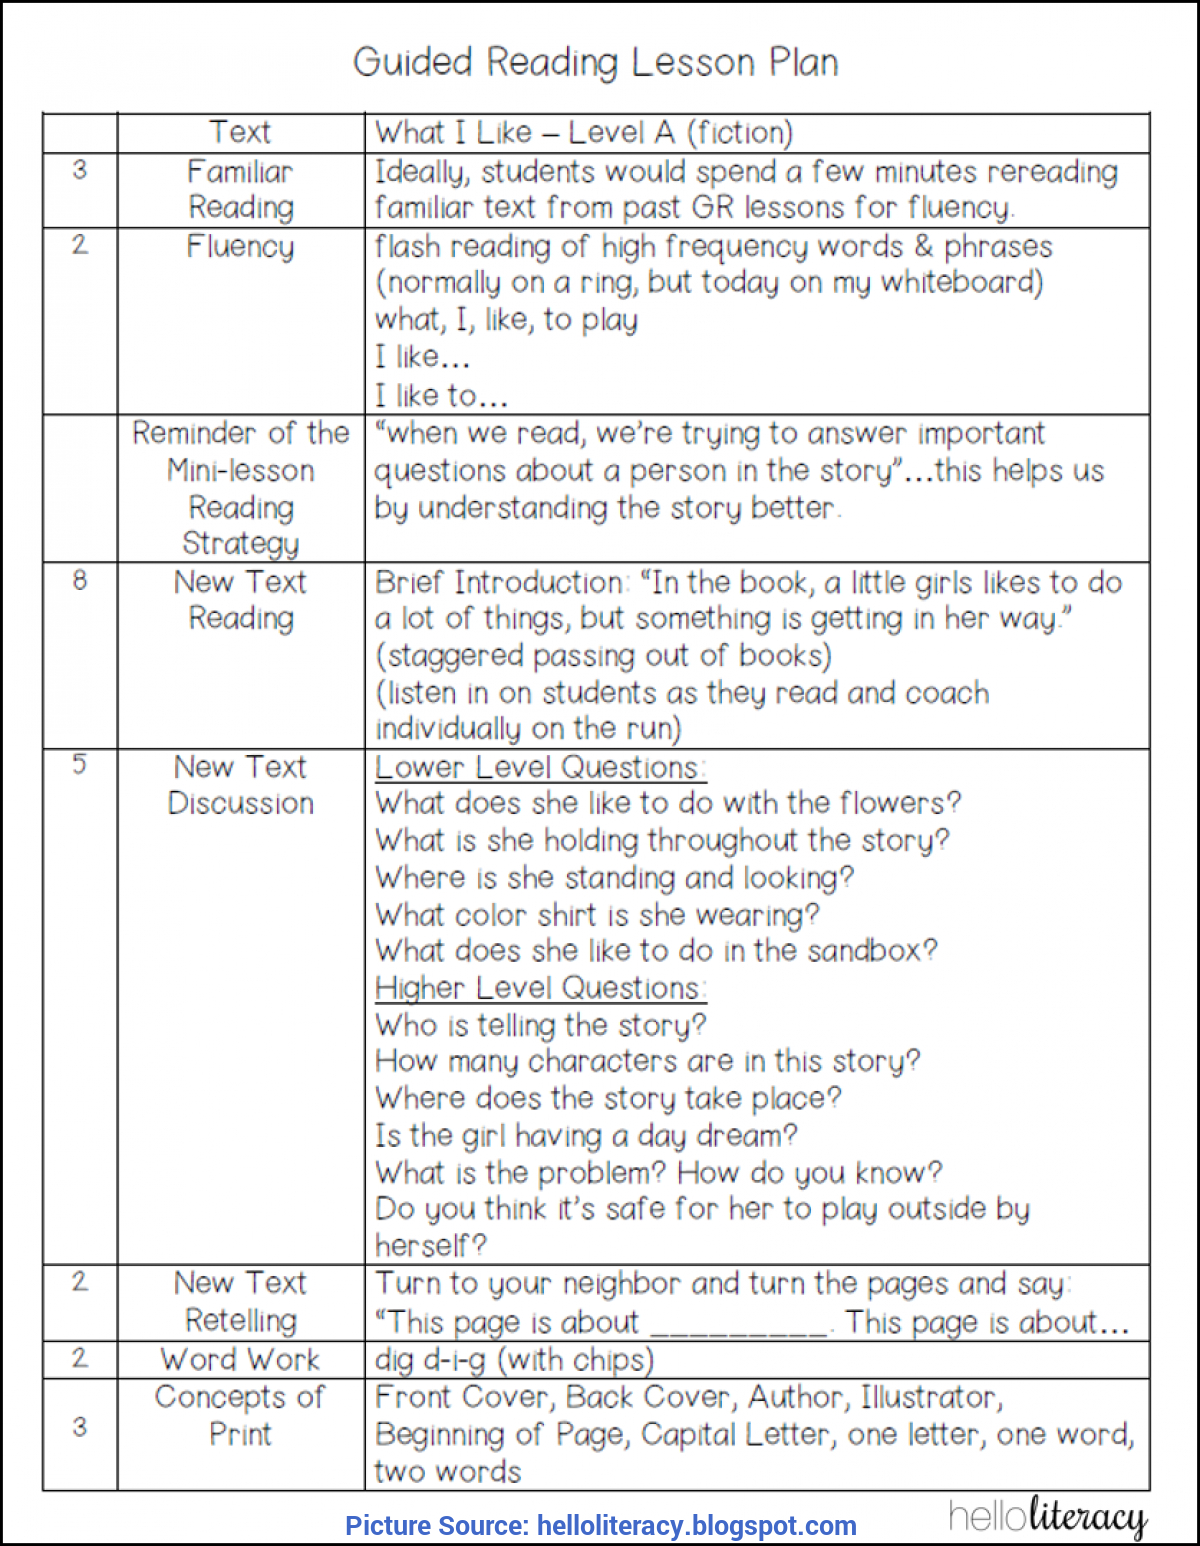 Valuable Guided Reading Lesson Plan Template Fountas And For Guided Reading Lesson Plan Template Fountas And Pinnell